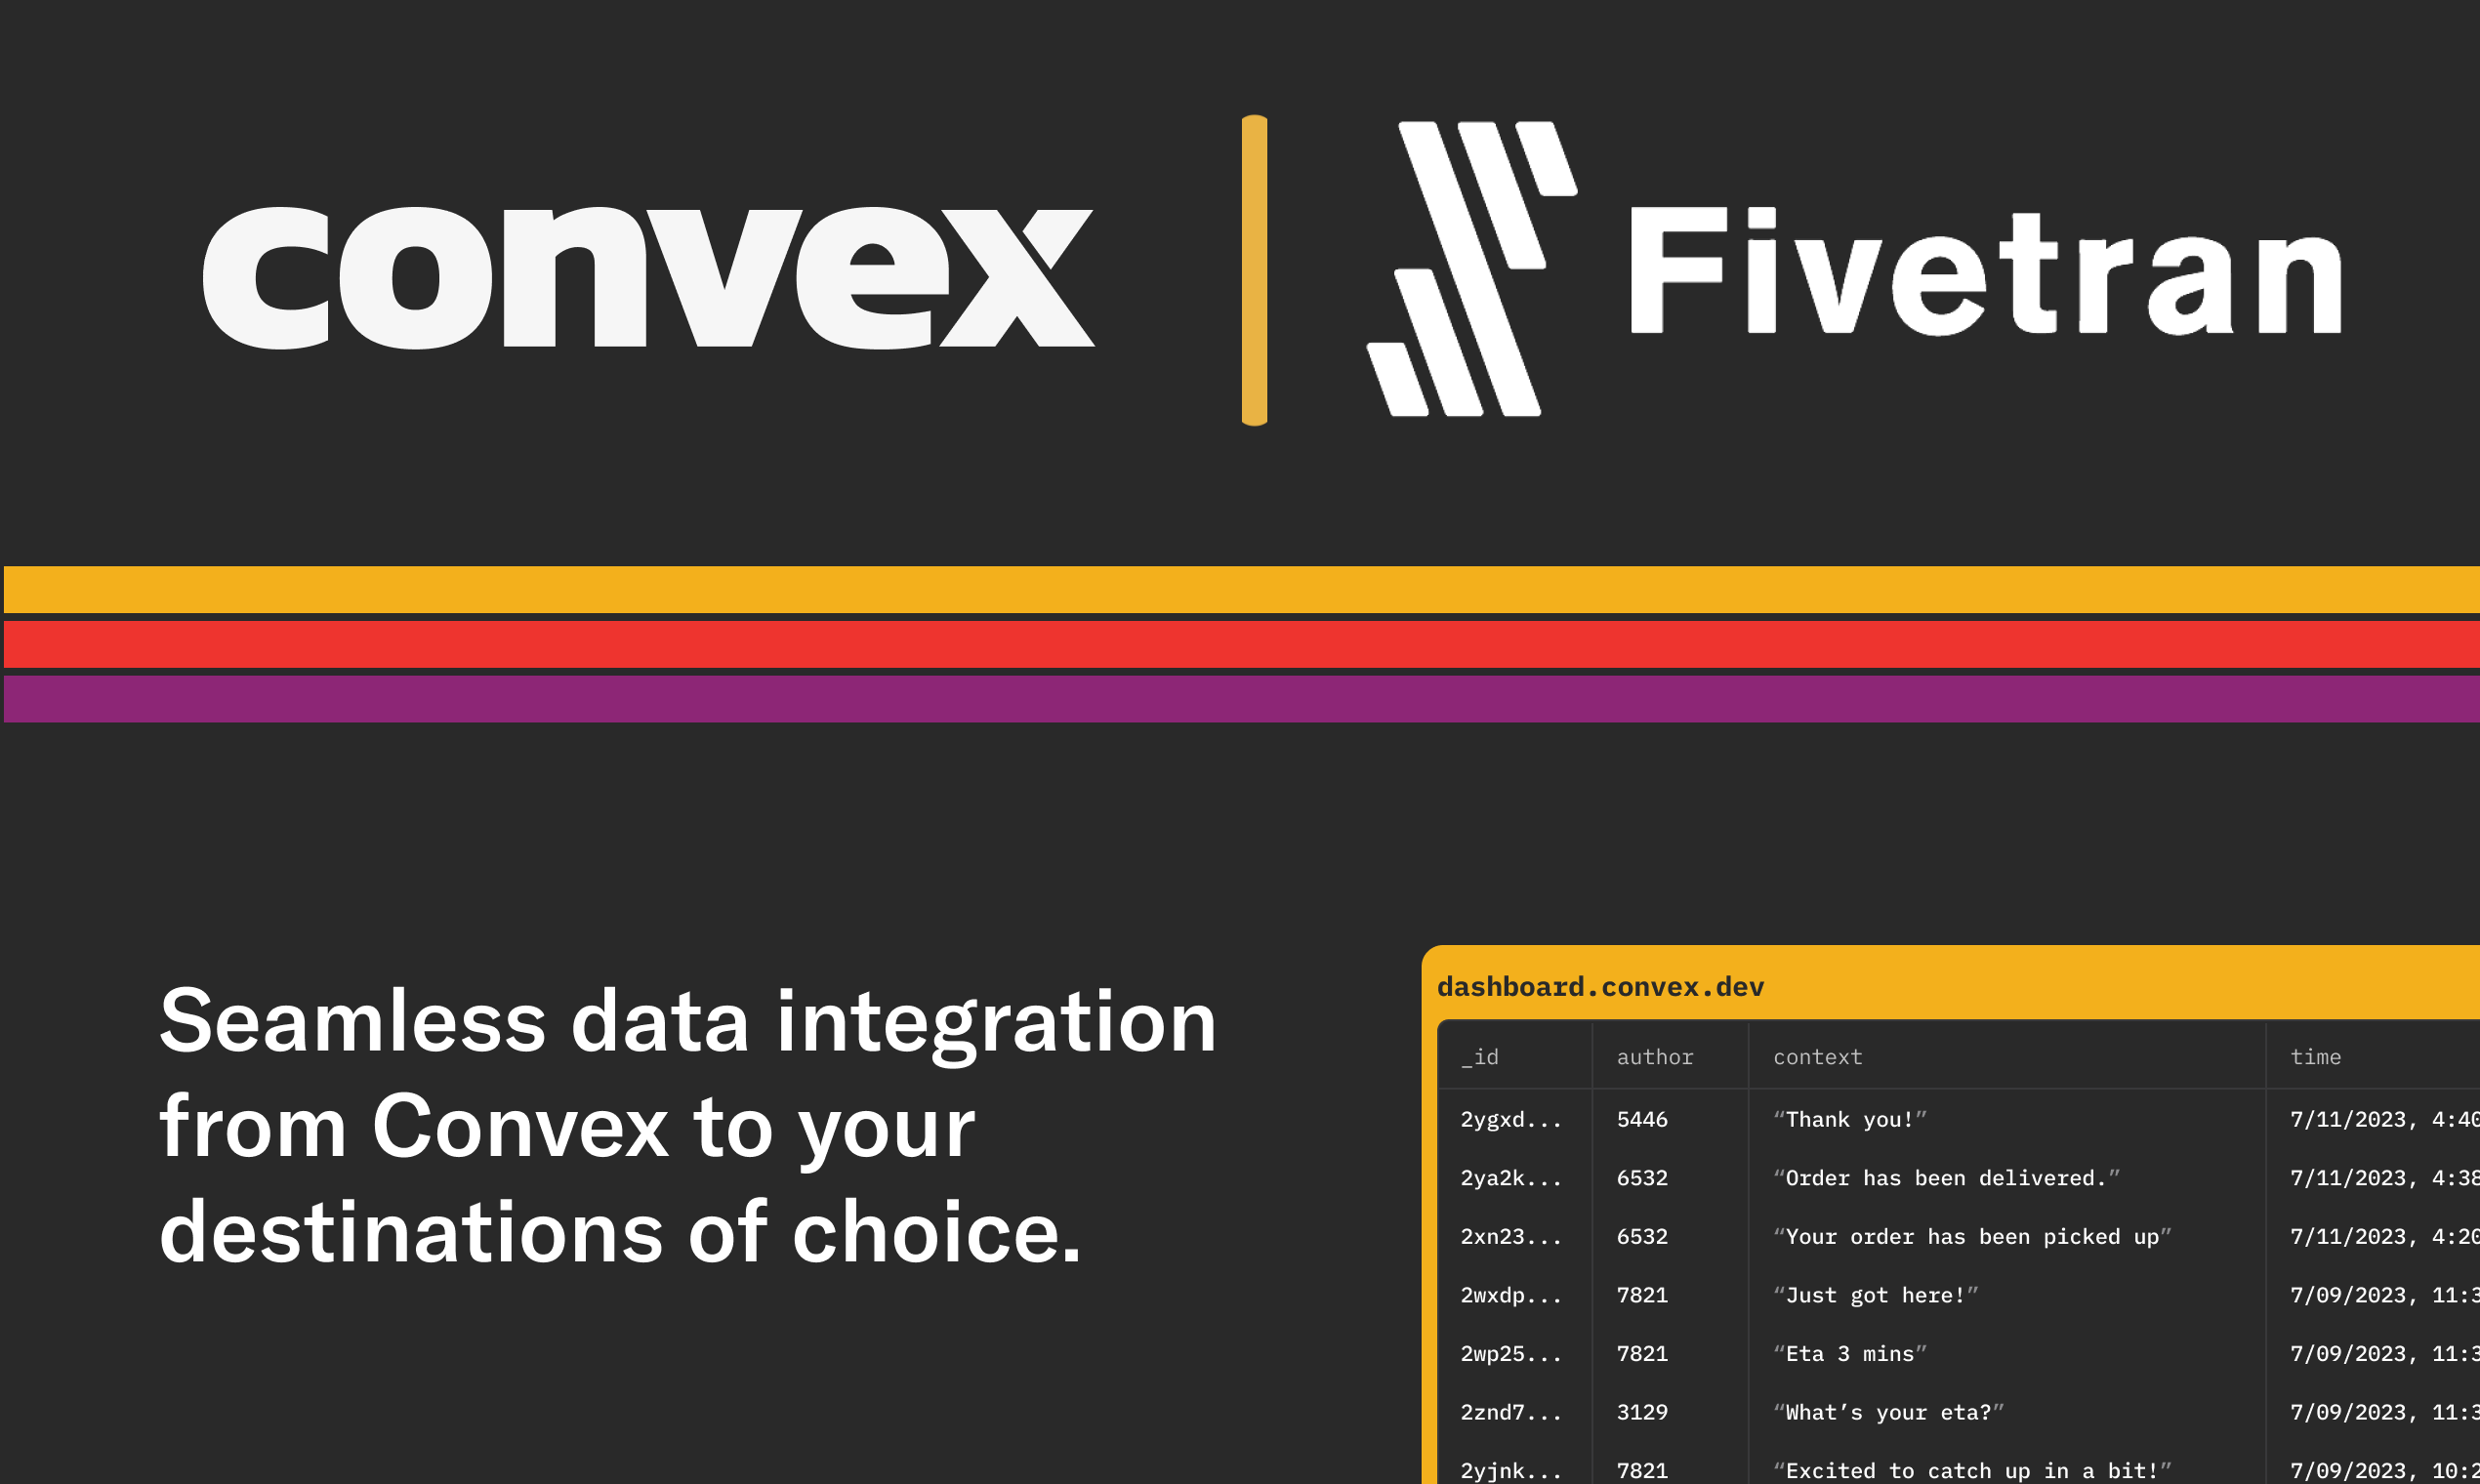 Convex and Fivetran logos over a colored stripe. Text reads: "Seamless data integration from Convex to your destinations of choice" alongside a stylized version of the Convex frontend.